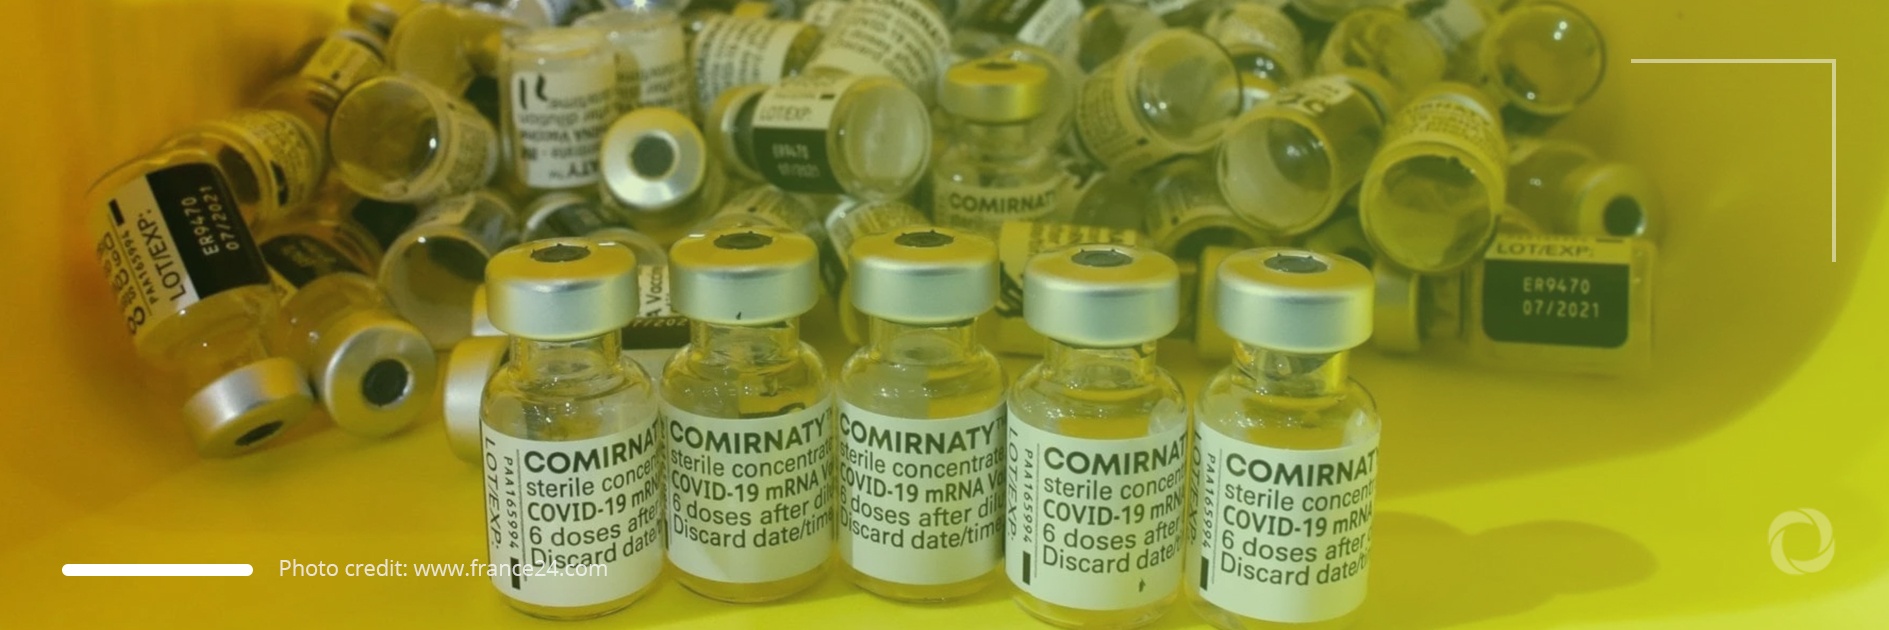 Amnesty International: Refugees do not have equal access to COVID-19 vaccines